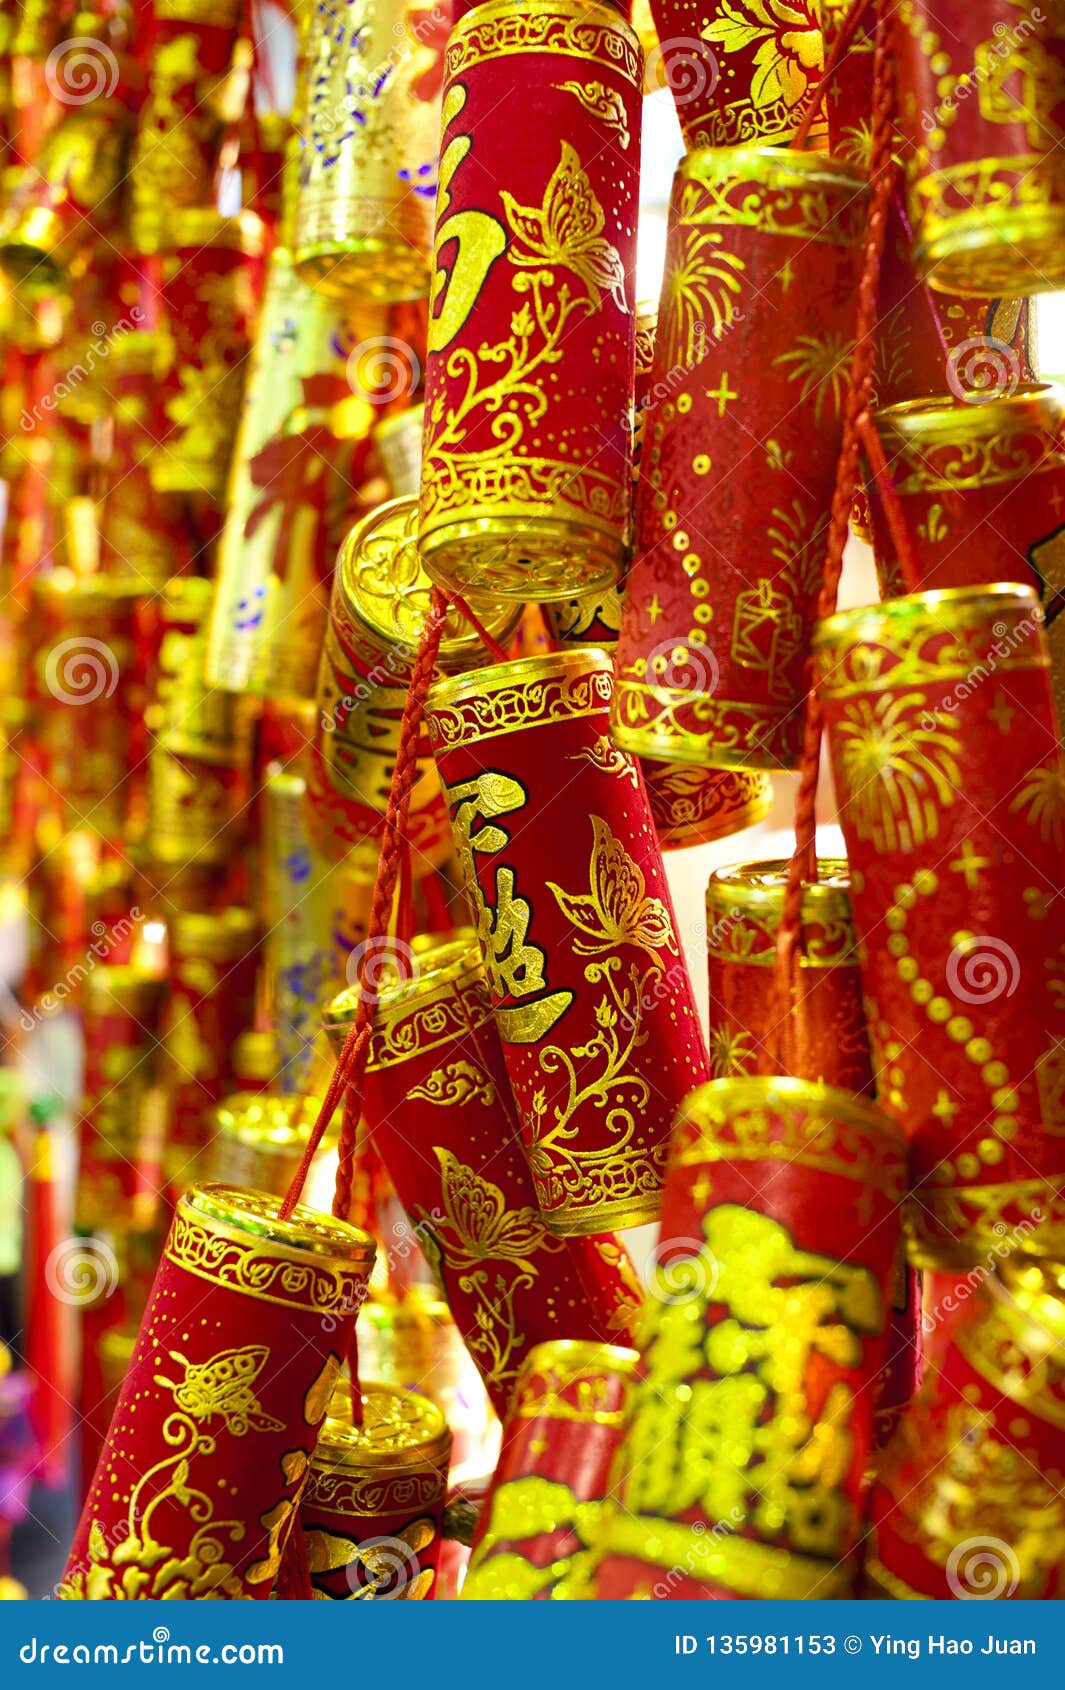 Golden Plastic Ornaments for the Chinese New Year Stock Image - Image ...